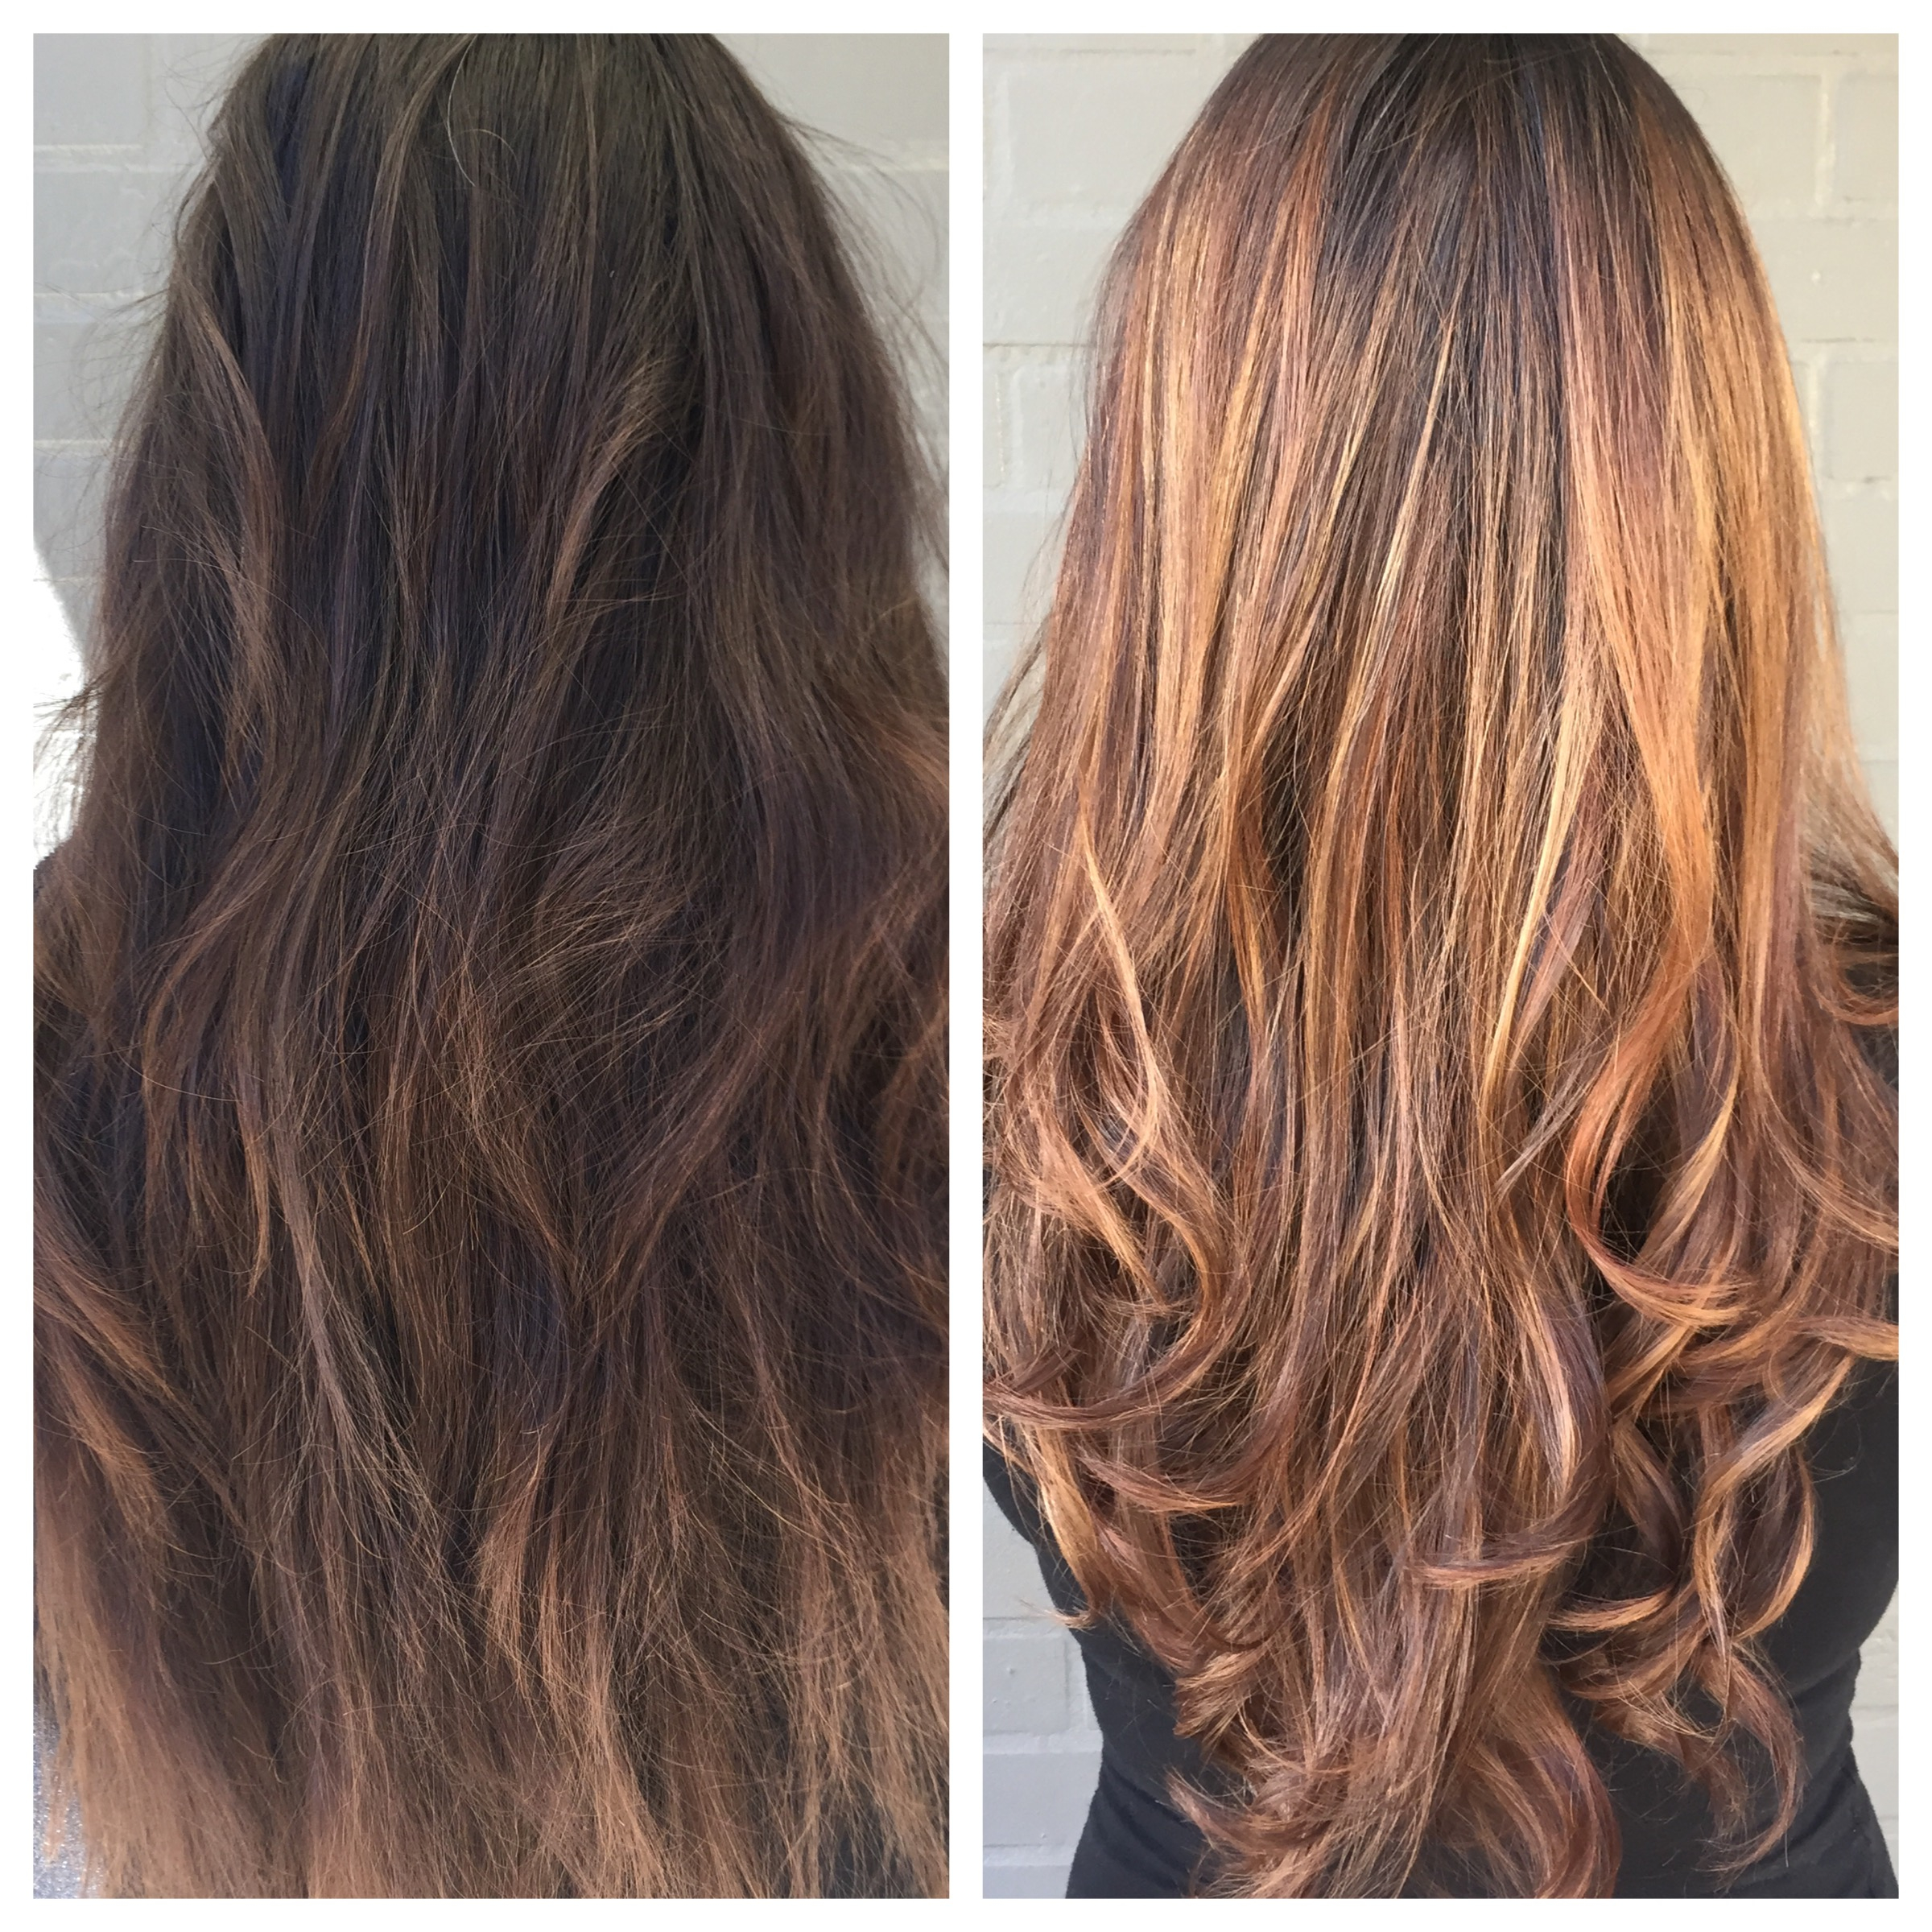 great hair for under $20, before and after